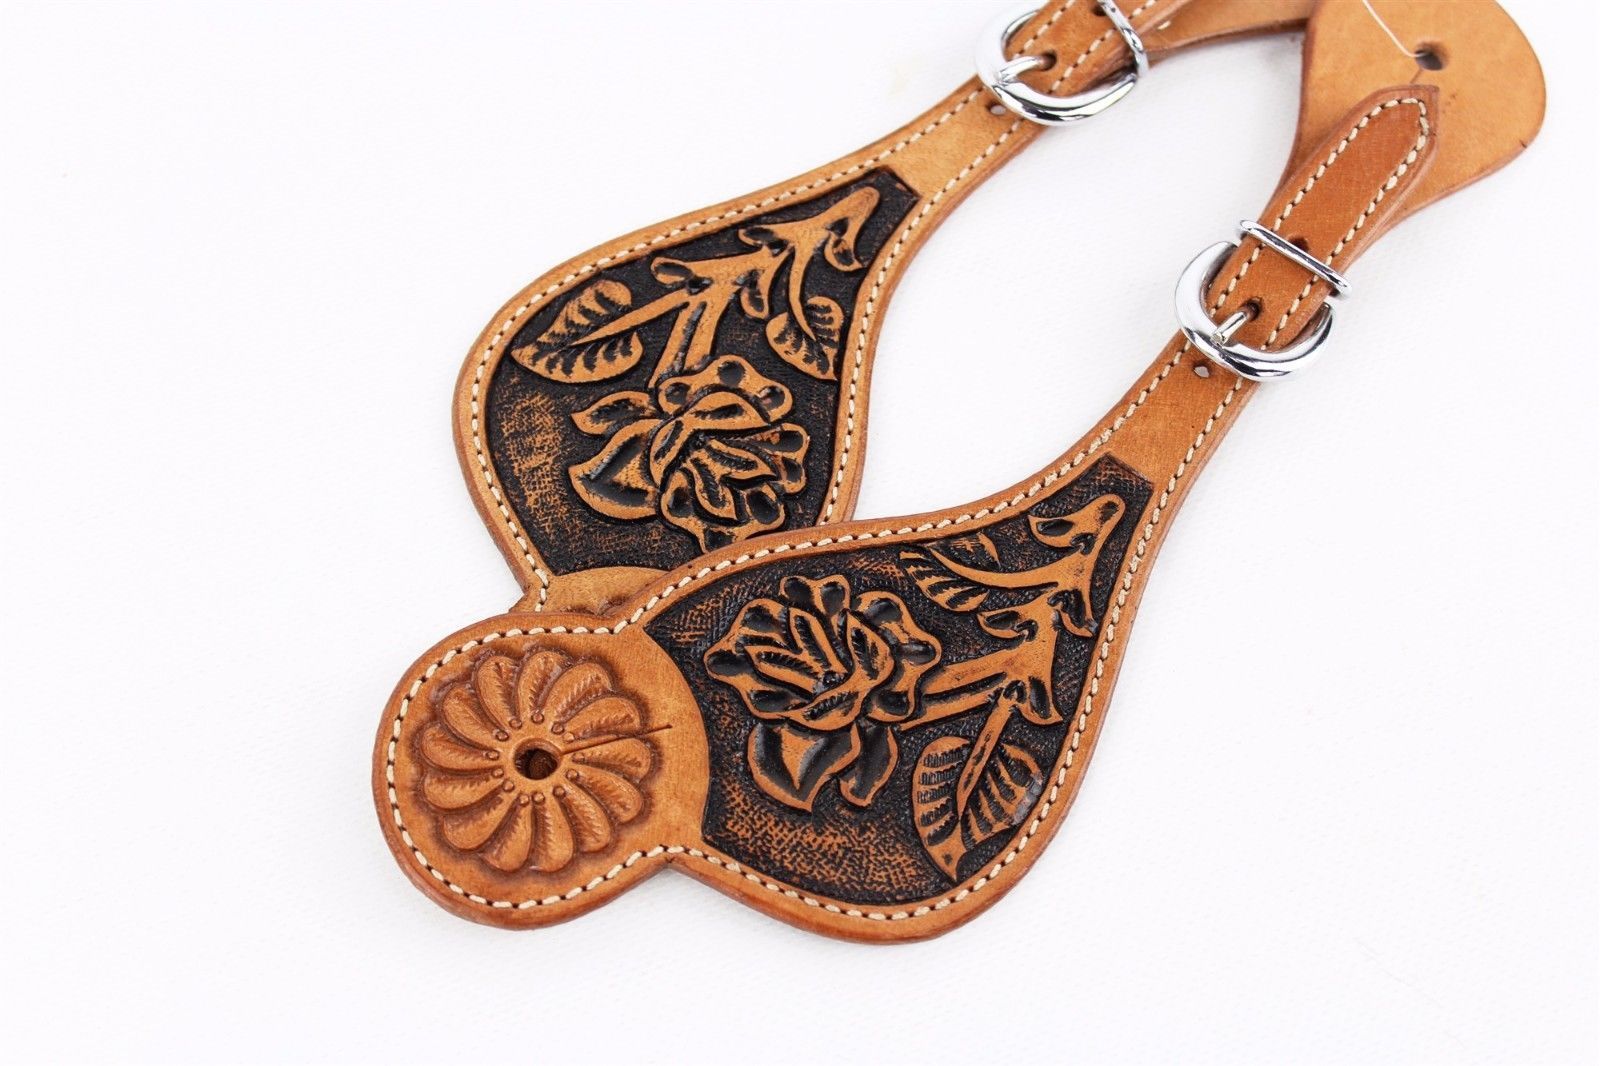 C-S121 New Hilason Western Show Tack Hand Tooled Leather Spur Straps Light Oil